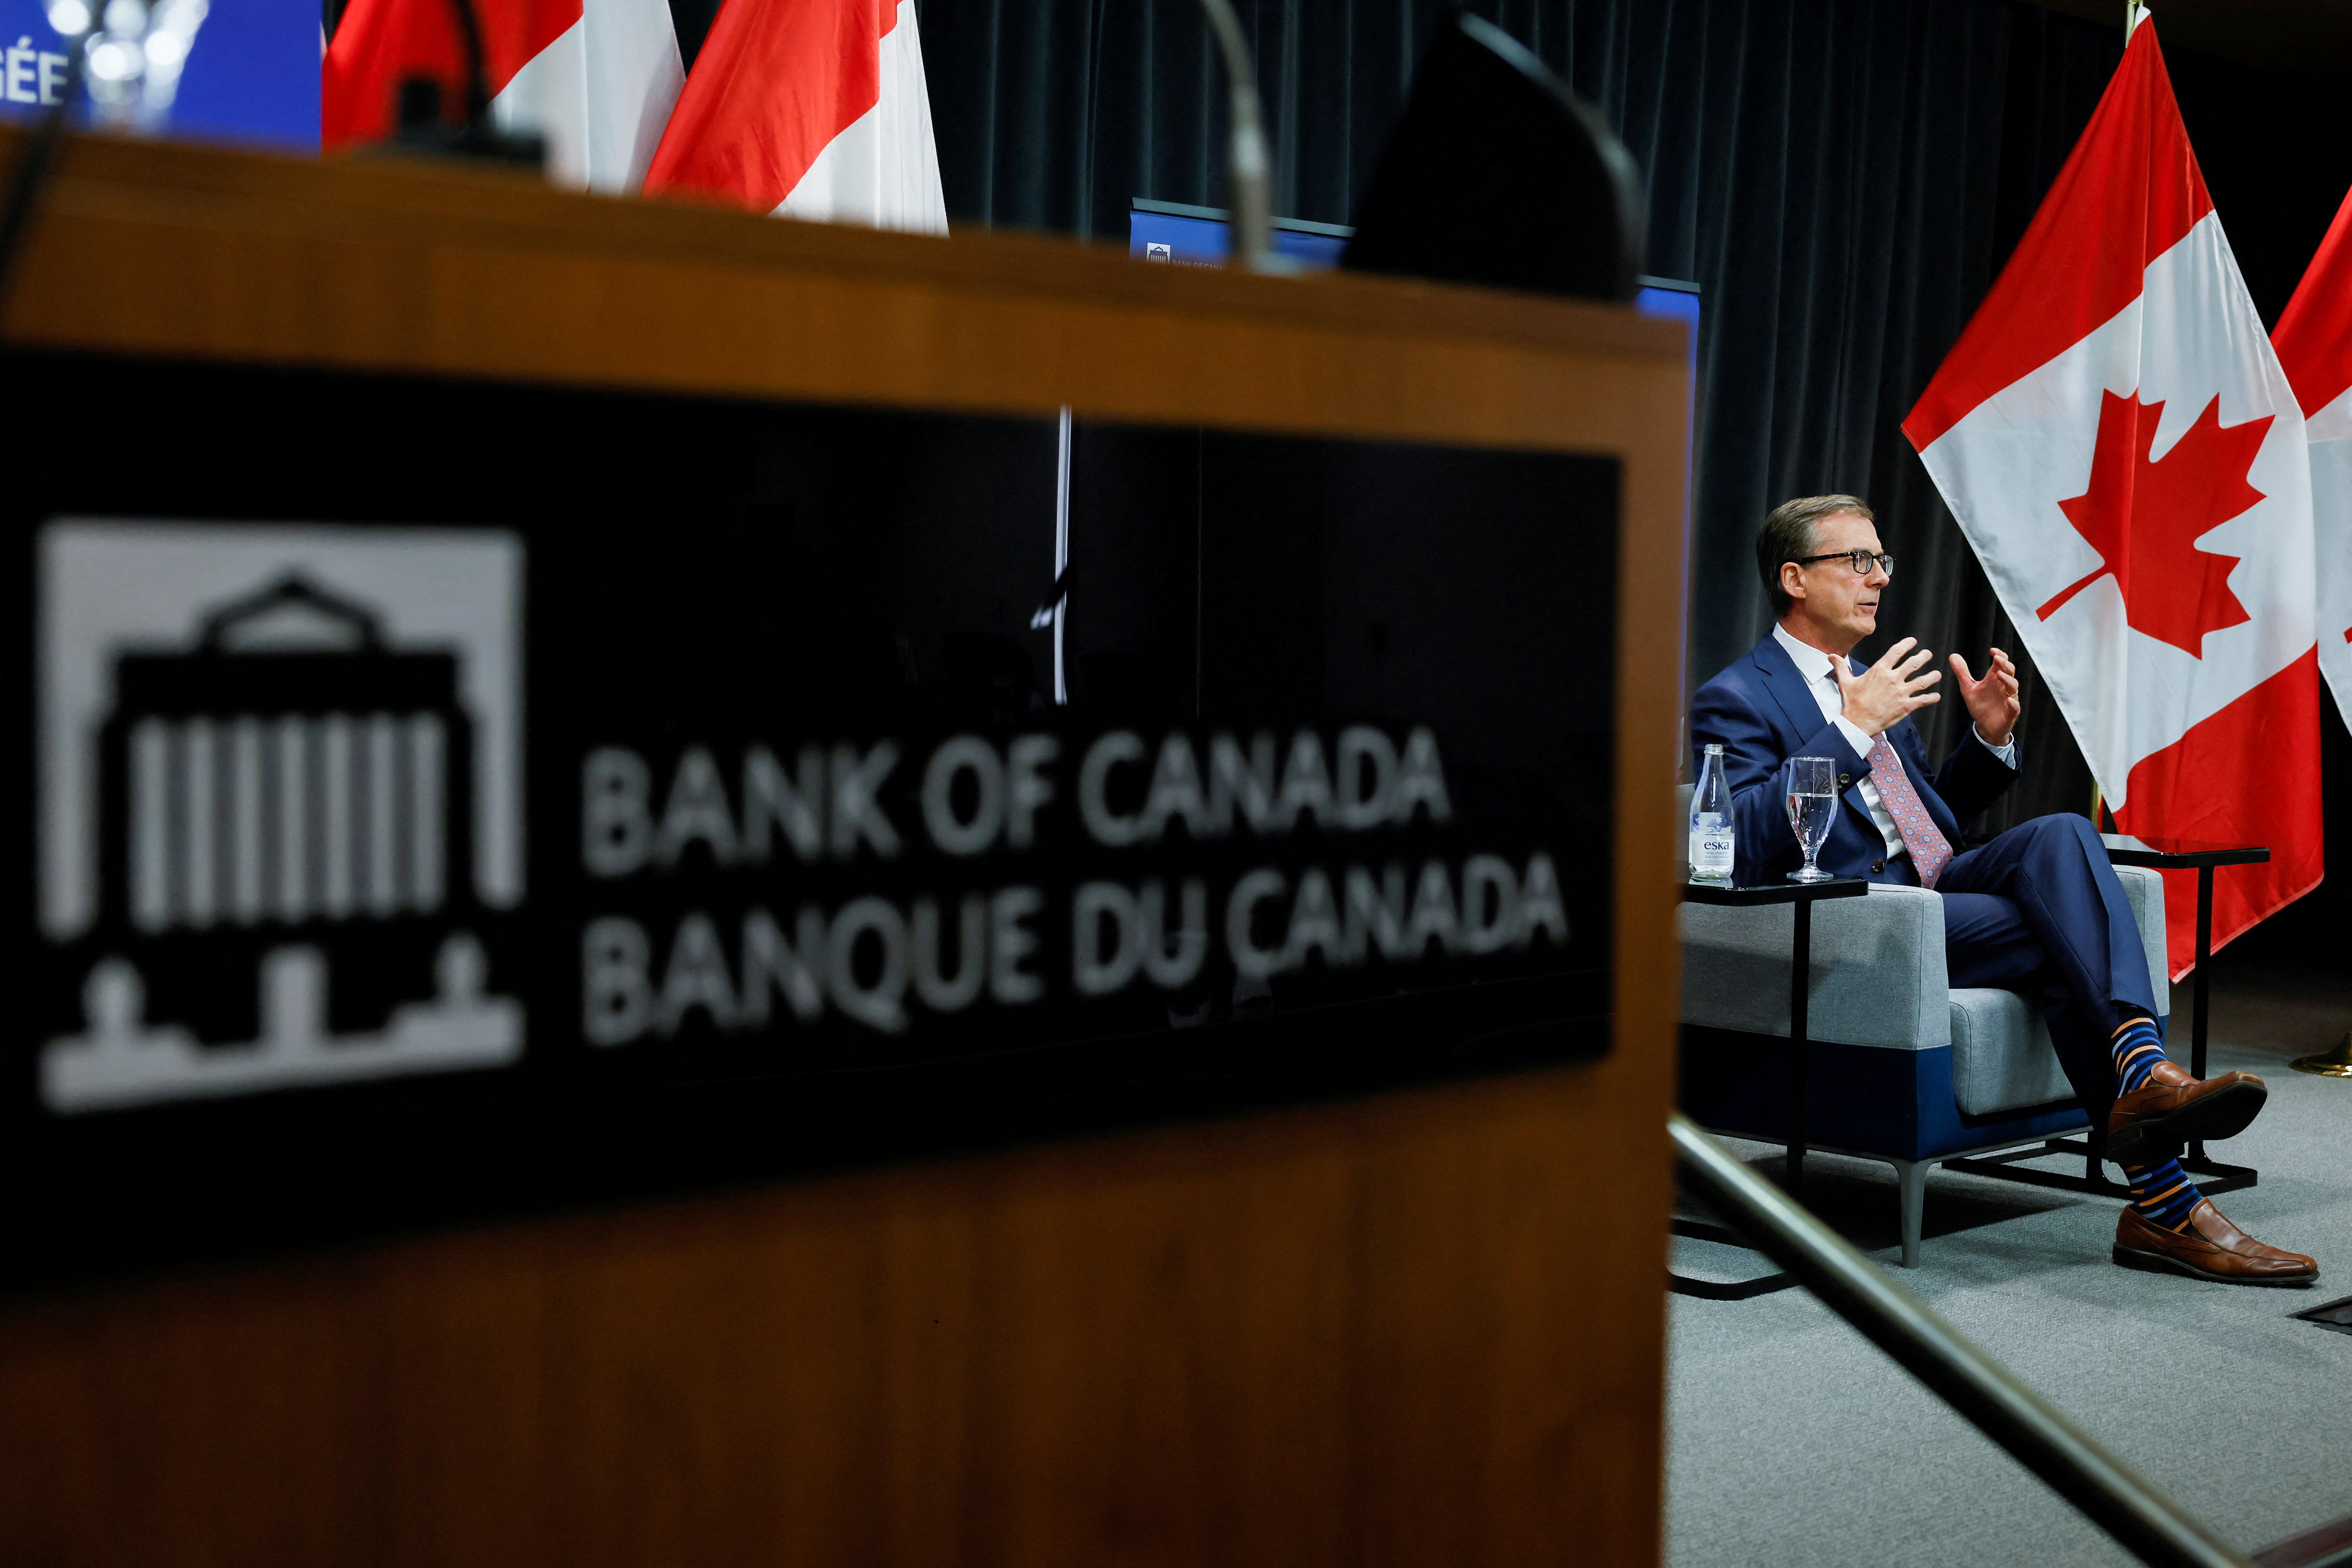 Bank of Canada Governor Tiff Macklem takes part in an event at the Bank of Canada in Ottawa